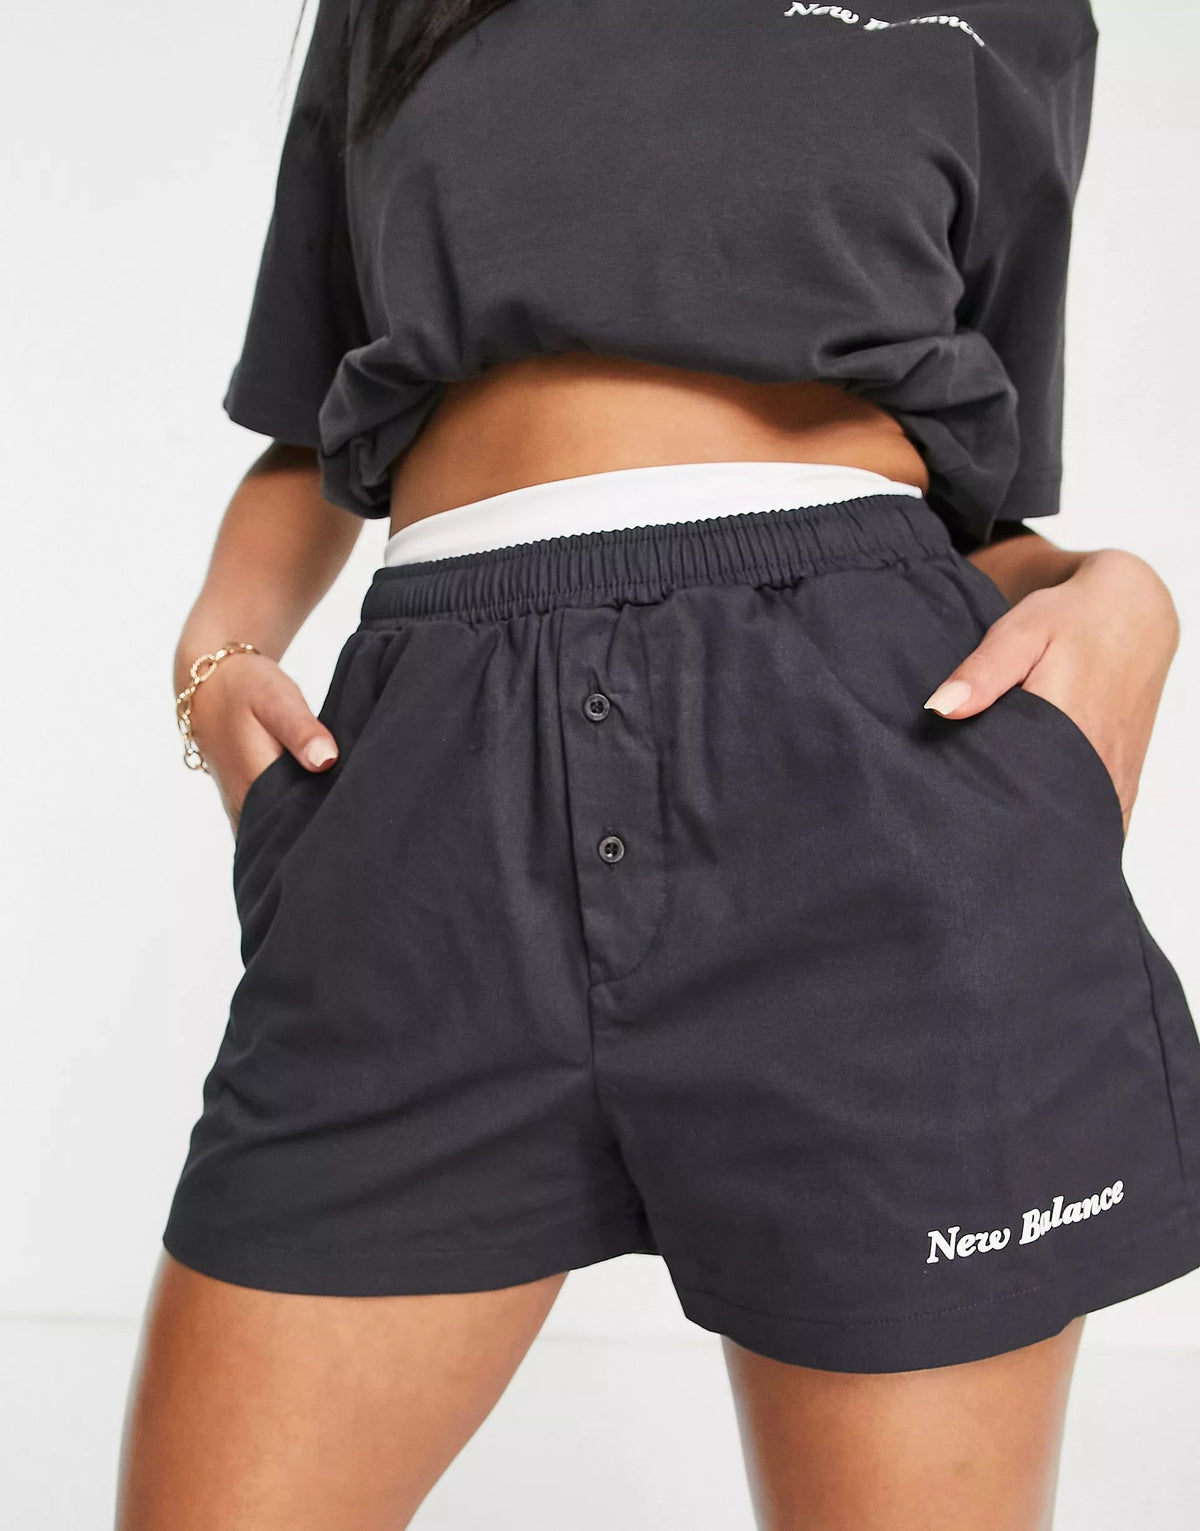 New Balance Mens 'Elevate Yourself' Unisex Shorts in Black